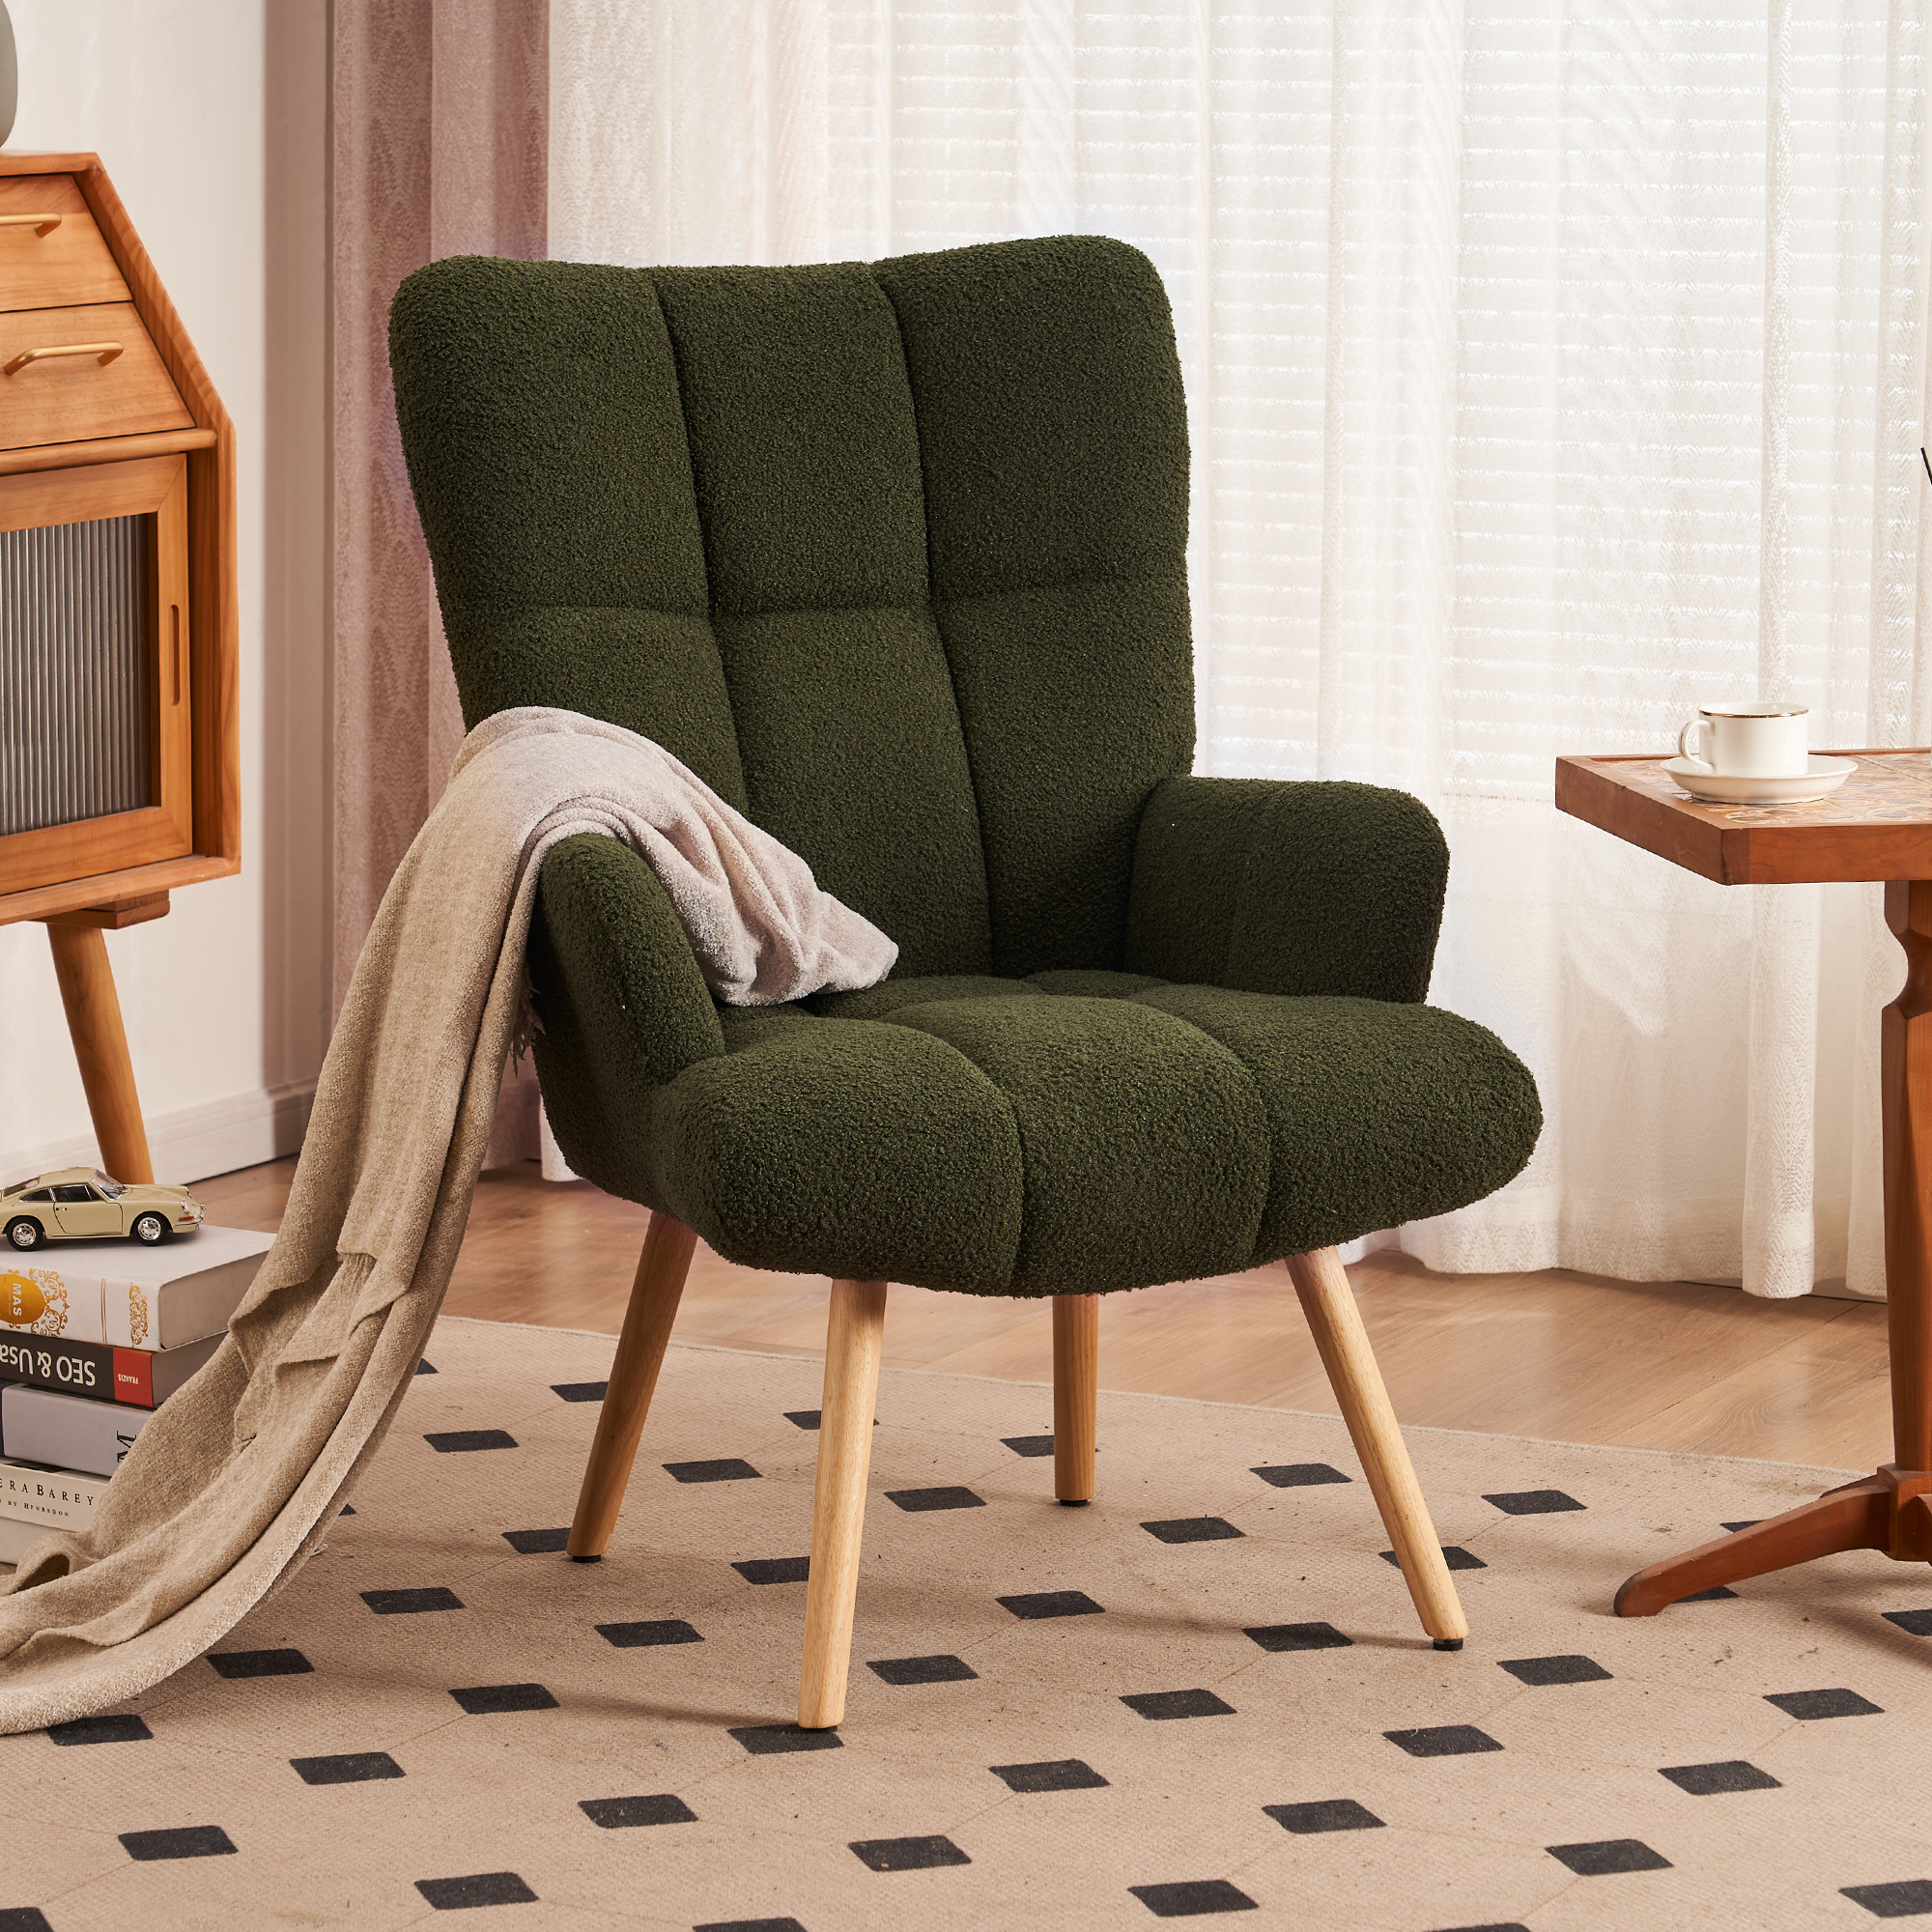 Teddy Velvet Accent Chair, Teddy Furry Casual Chair With High Back And Soft Padded, Modern Armchair Chair - Green